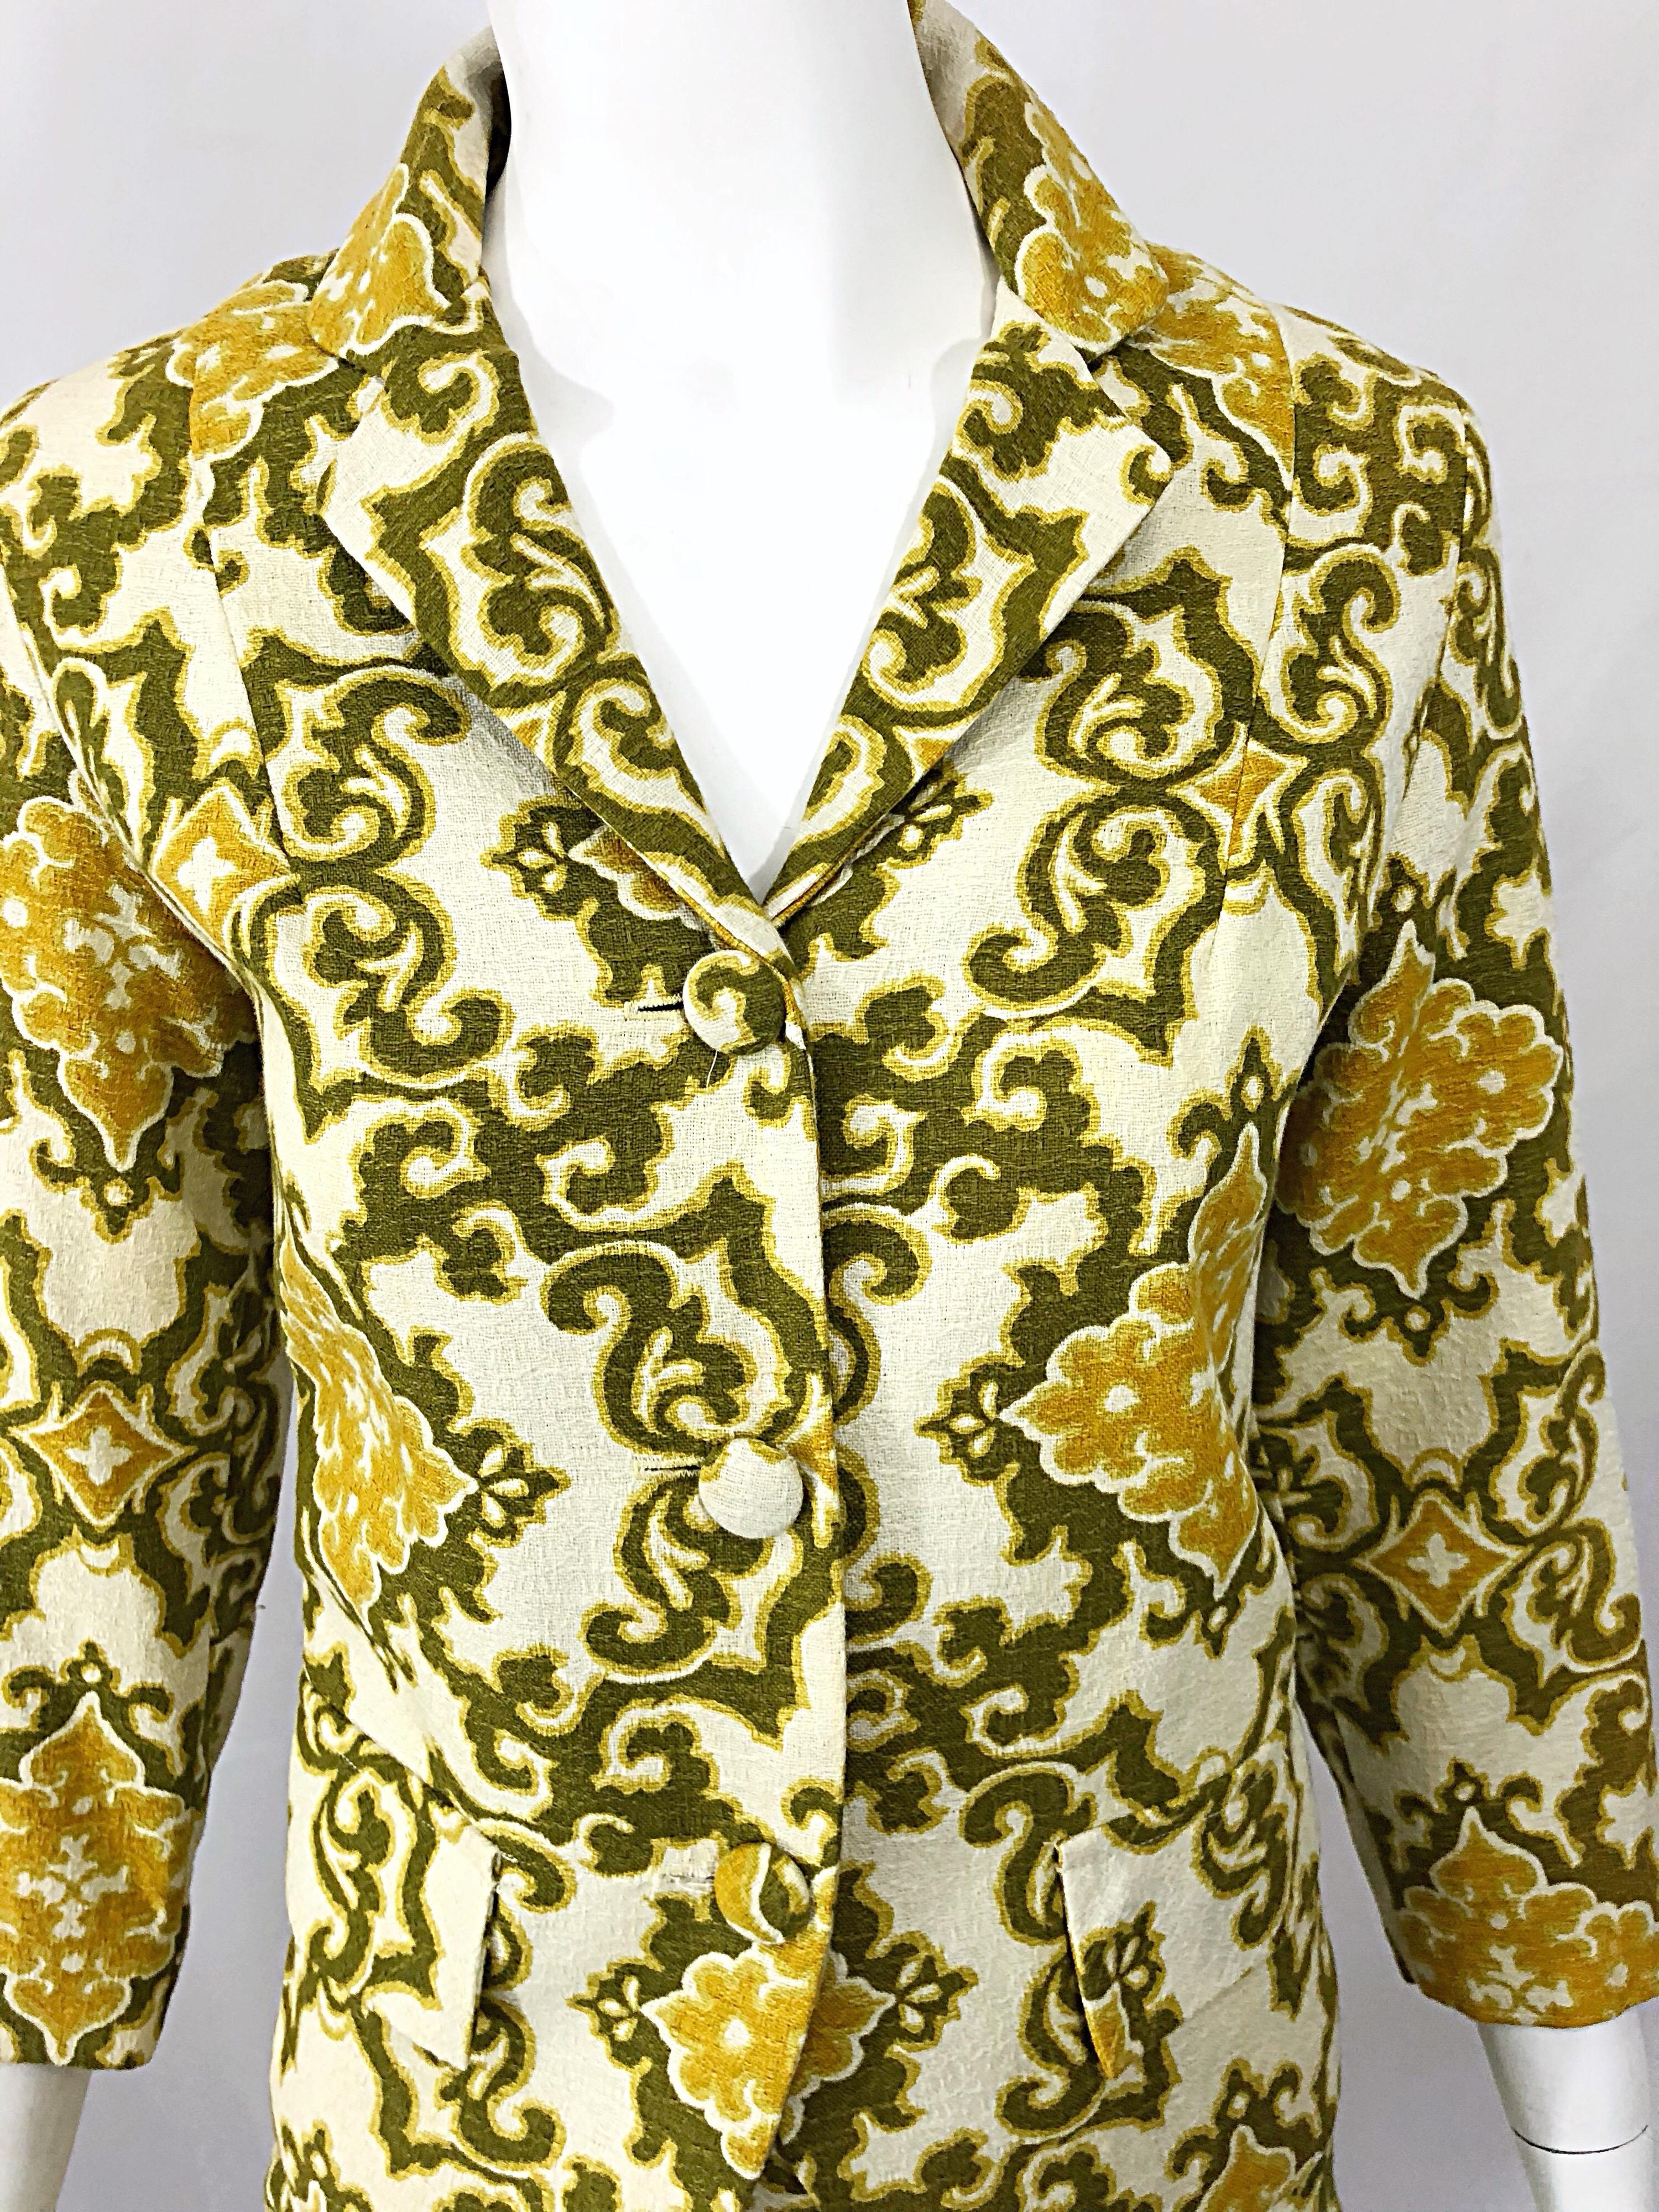 Chic vintage 1960s JOSEPH MAGNIN baroque print silk and cotton blend two piece skirt suit! Features baroque print throughout in vibrant warm tones of chartreuse green, yellow and ivory. Jacket has three buttons up the front. High waisted pencil